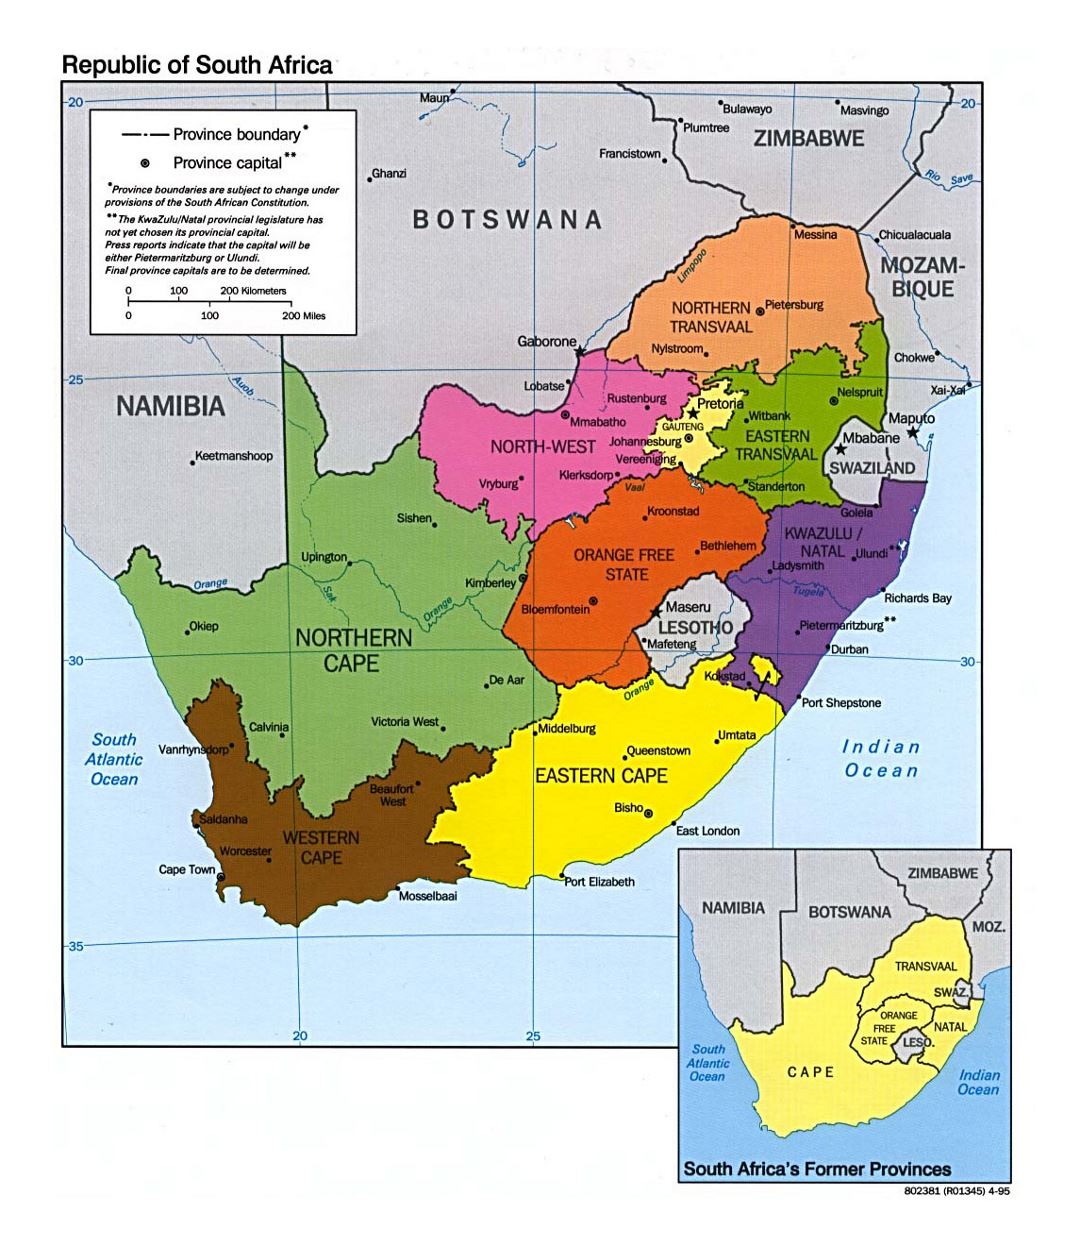 Detailed provinces map of South Africa - 1995